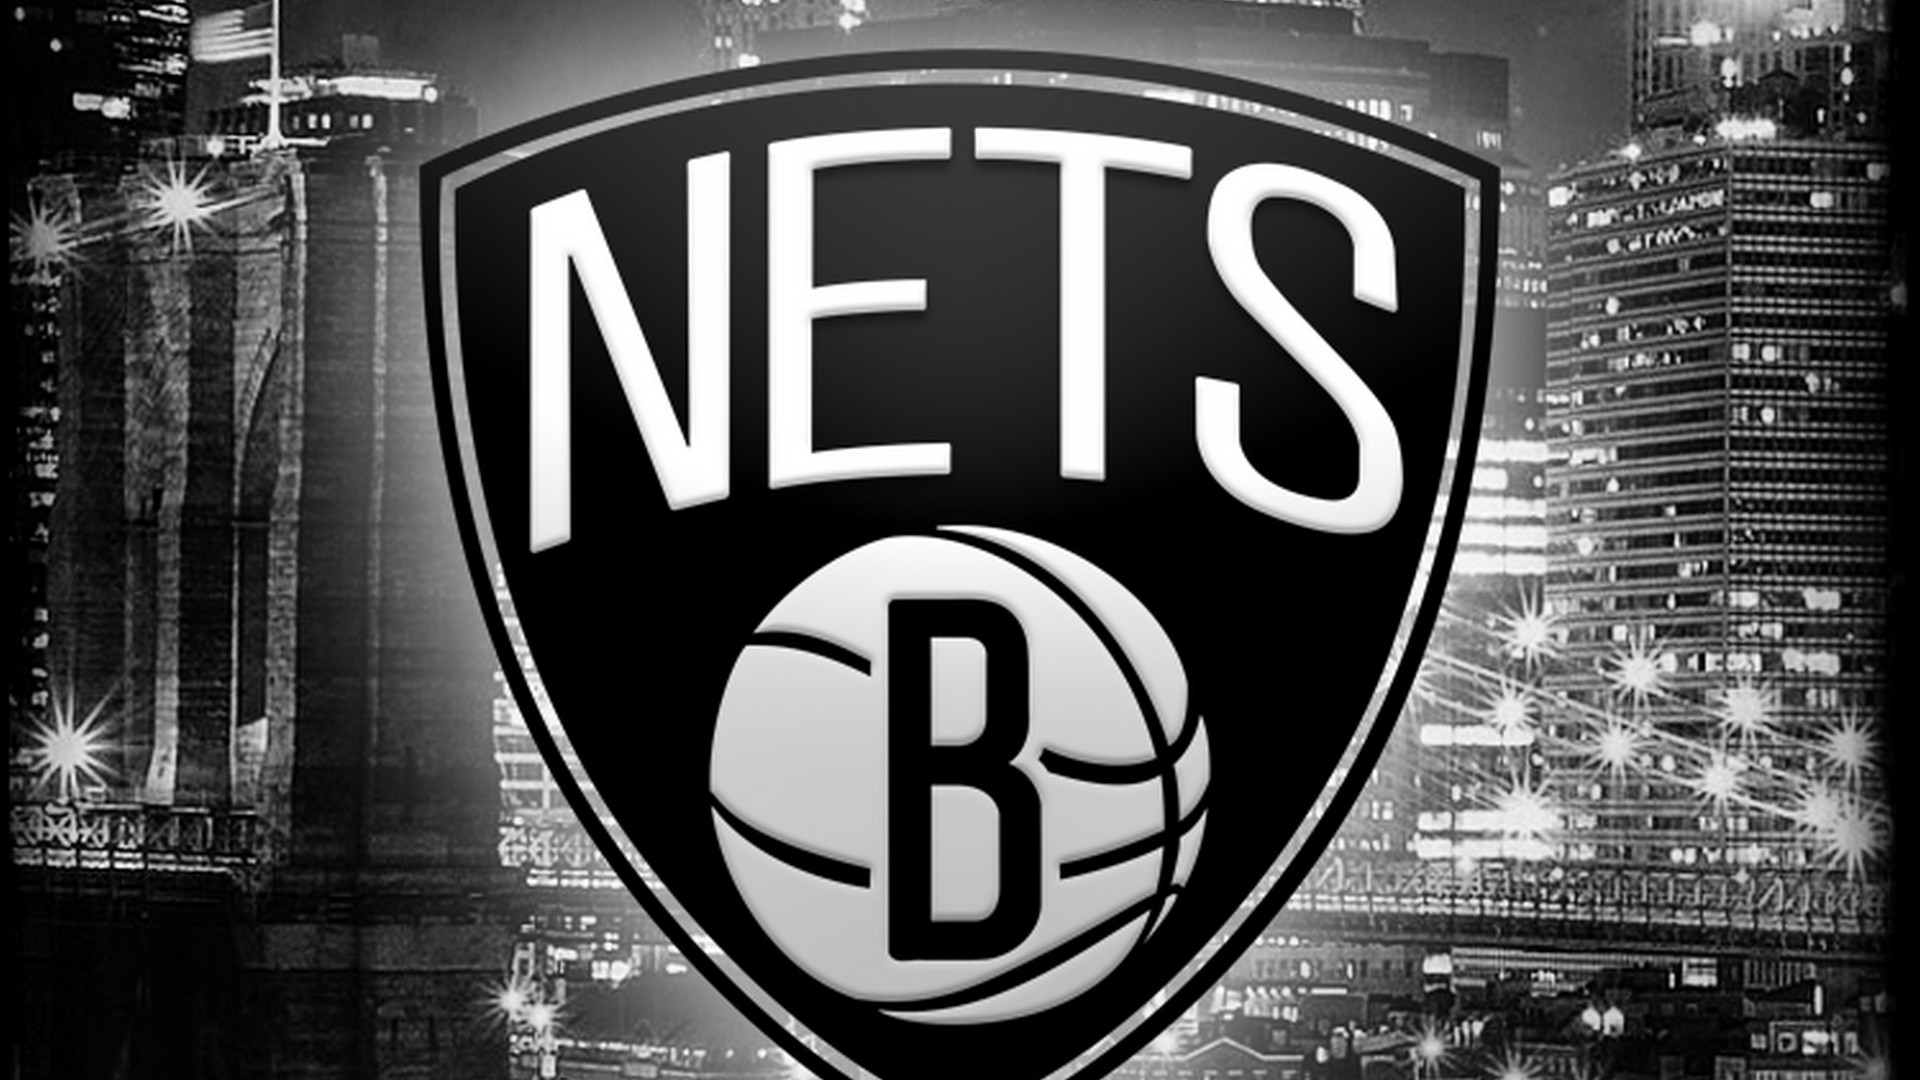 HD Desktop Wallpaper Brooklyn Nets with image dimensions 1920x1080 pixel. You can make this wallpaper for your Desktop Computer Backgrounds, Windows or Mac Screensavers, iPhone Lock screen, Tablet or Android and another Mobile Phone device